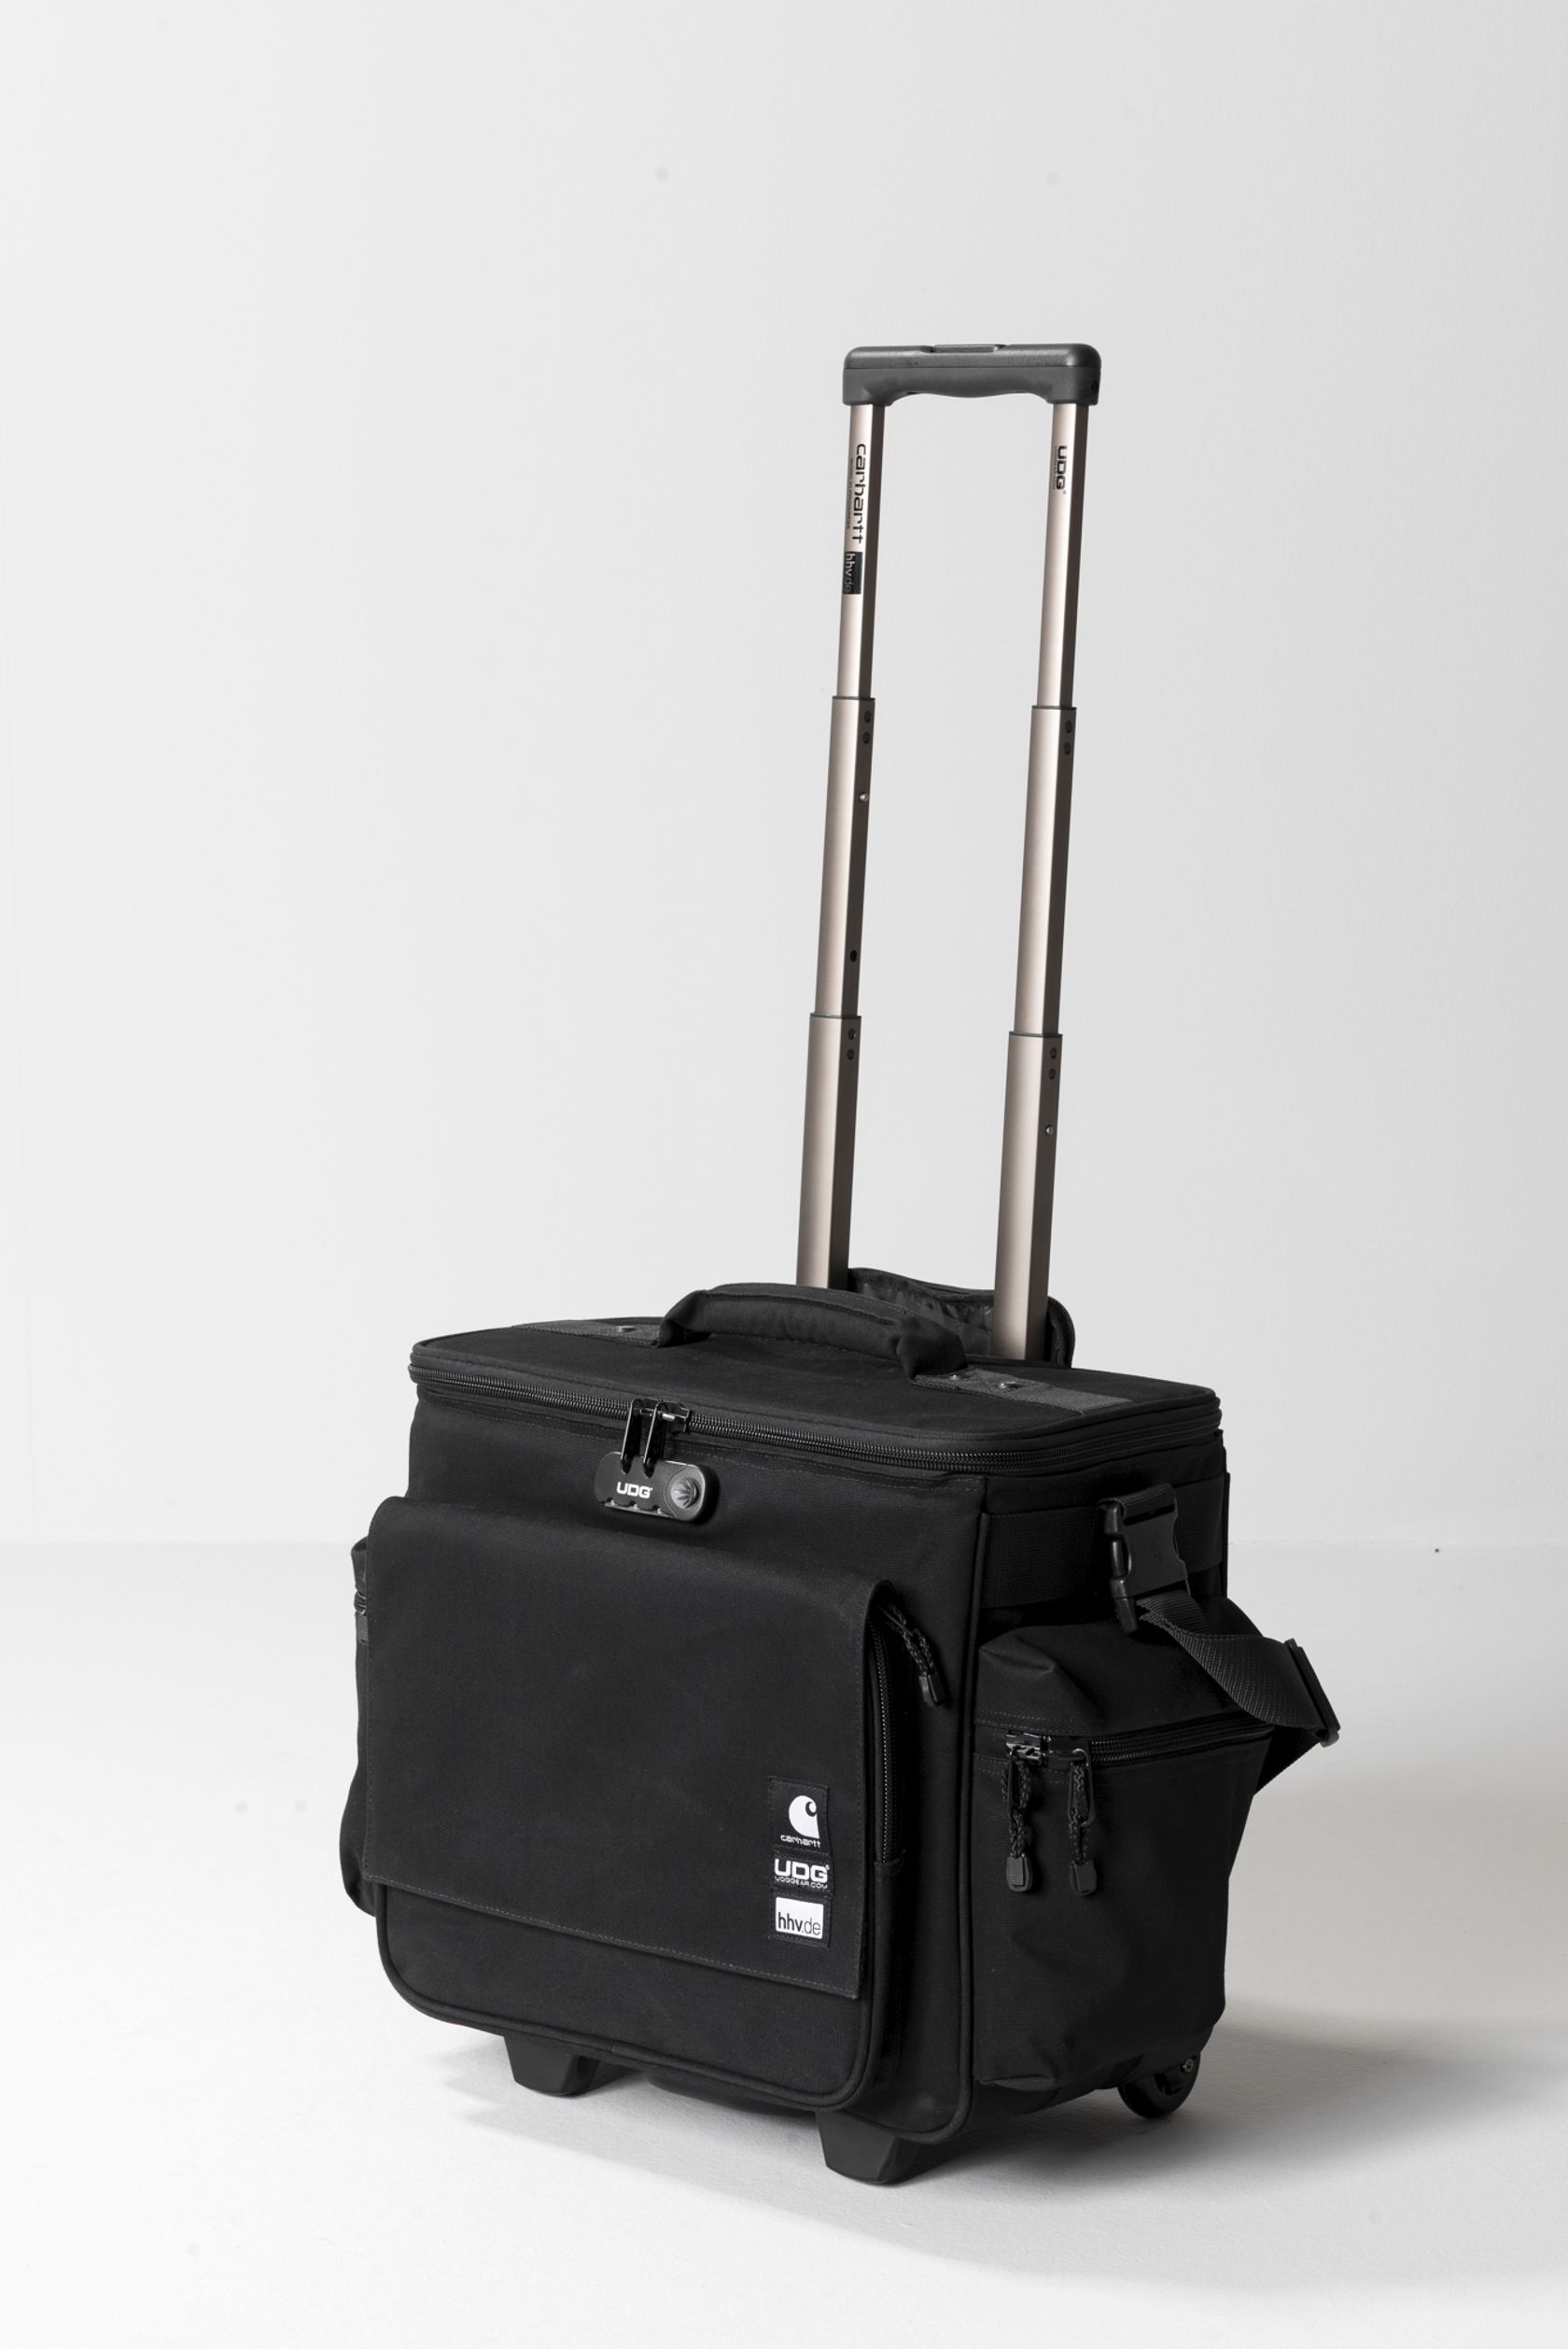 Carhartt WIP Carhartt WIP x HHV x UDG Sling Bag Trolley »For The 